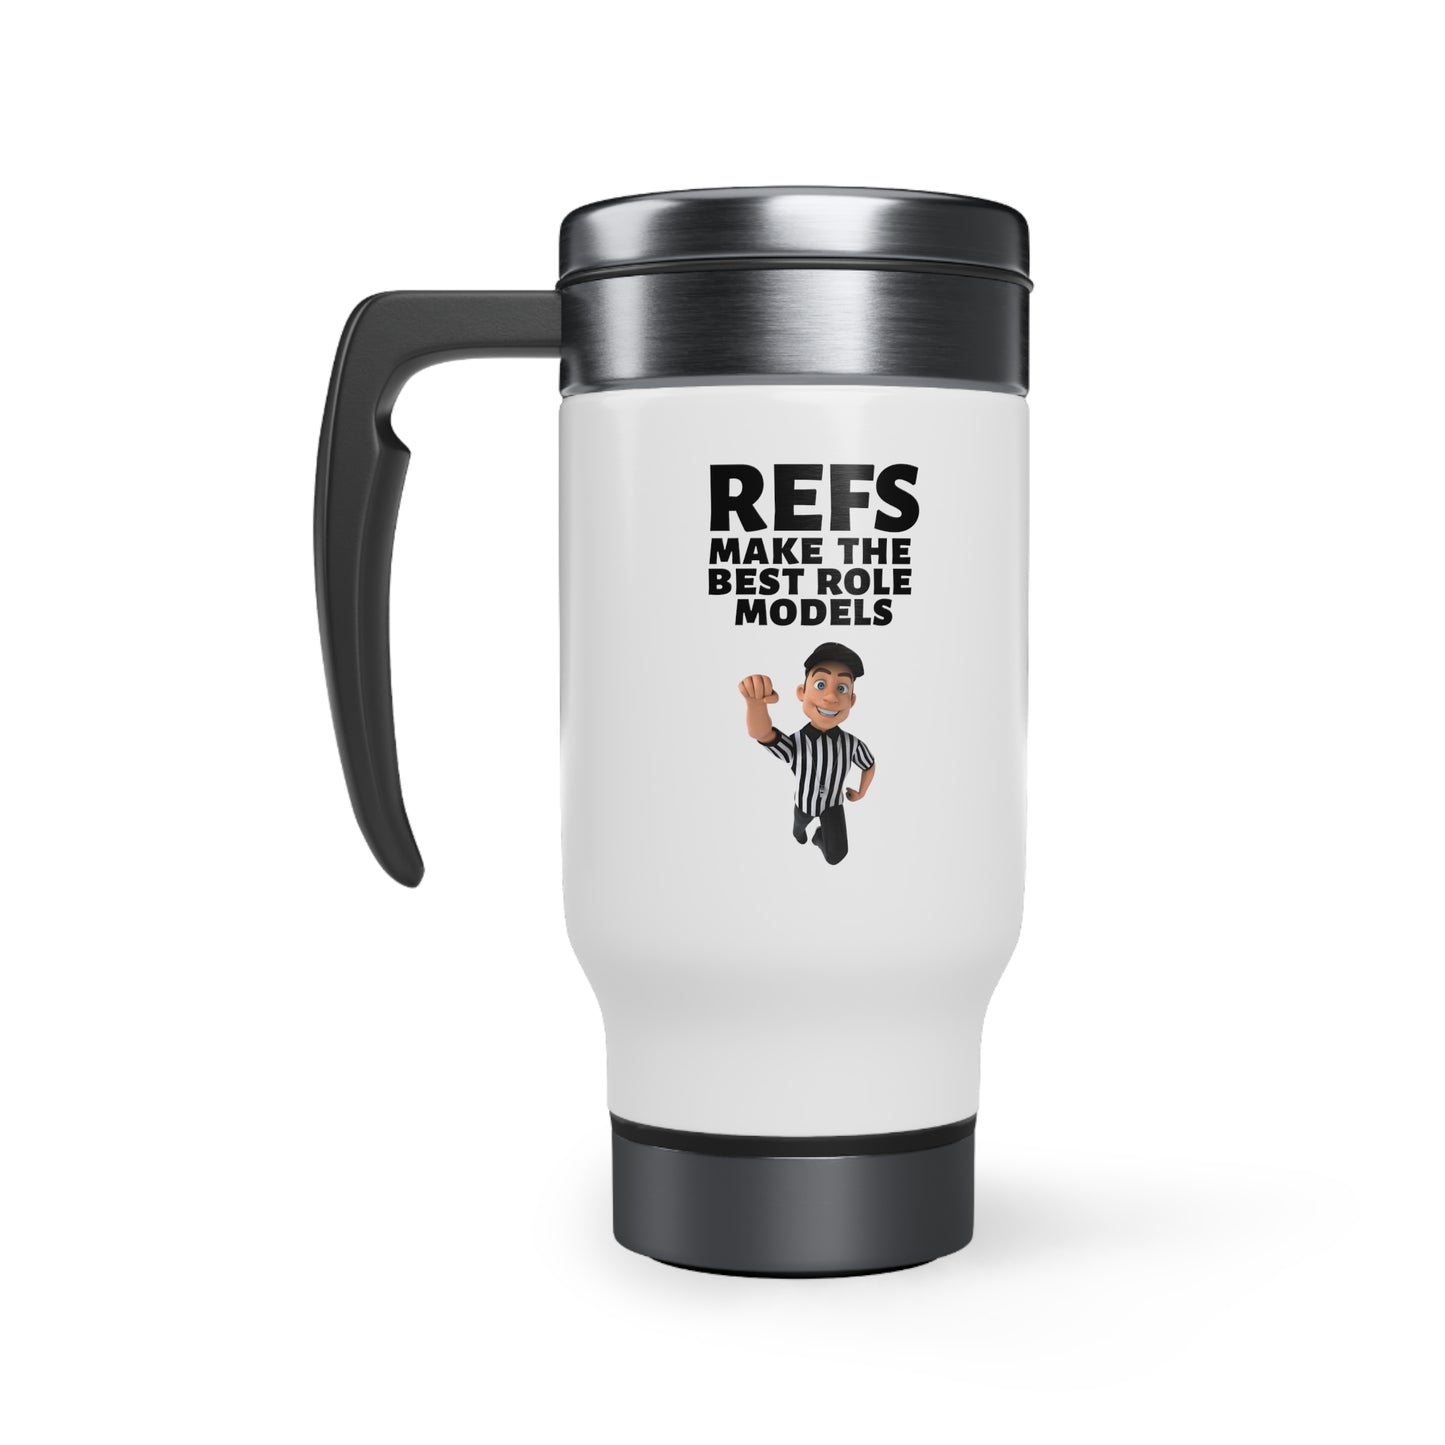 Another Ref Role Model Stainless Steel Travel Mug with Handle, 14oz